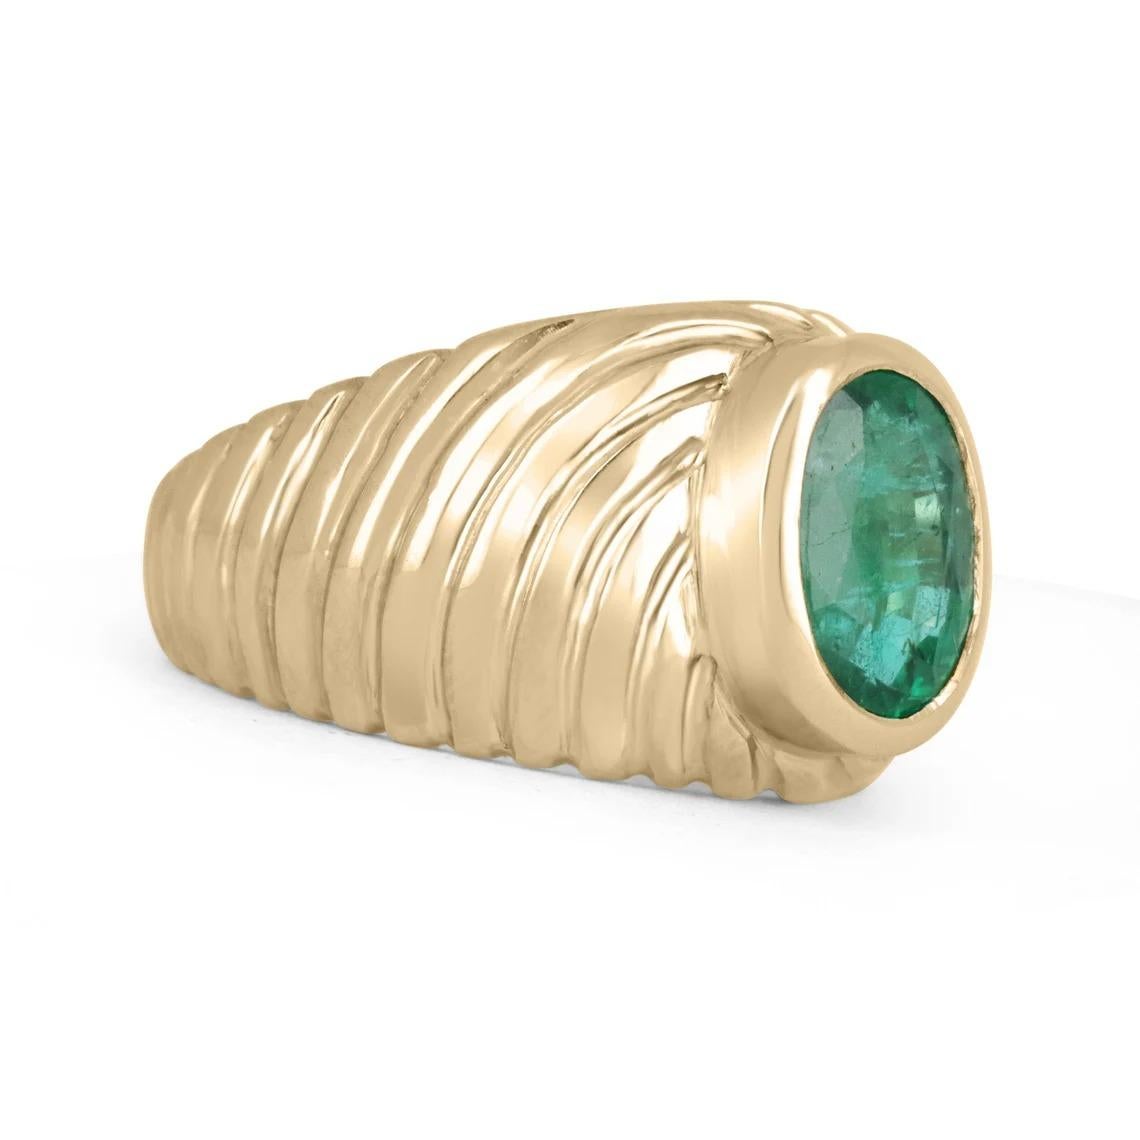 A custom-made, men's natural emerald solitaire ring made in 14K yellow gold. The earth-mined oval cut Zambian emerald is natural, and fine quality; with excellent luster and unique characteristics. The emerald is bezel set in a secure golden frame,